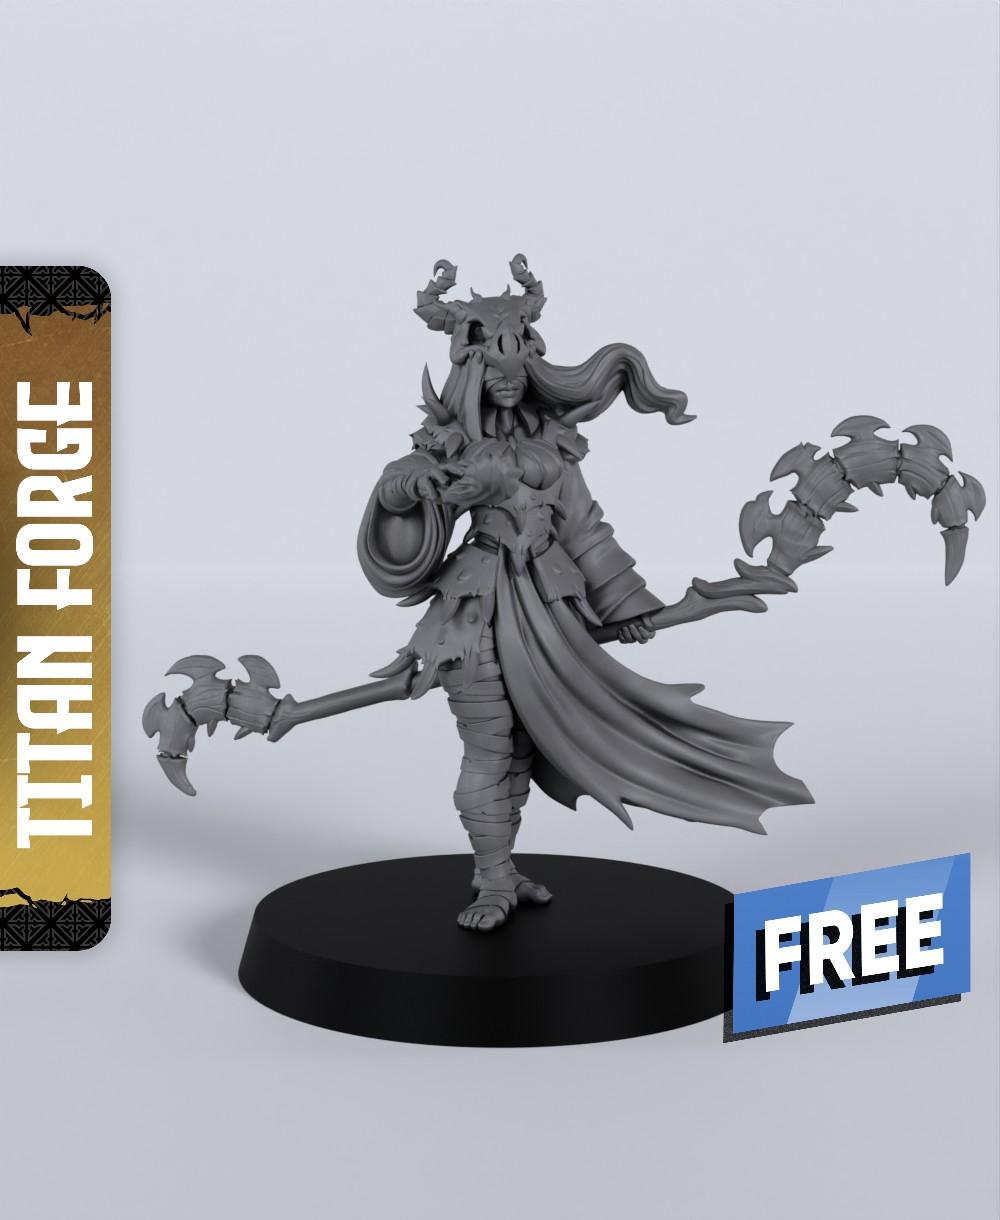 Human Female Warlock Caster - With Free Dragon Warhammer - 5e DnD Inspired for RPG and Wargamers 3d model